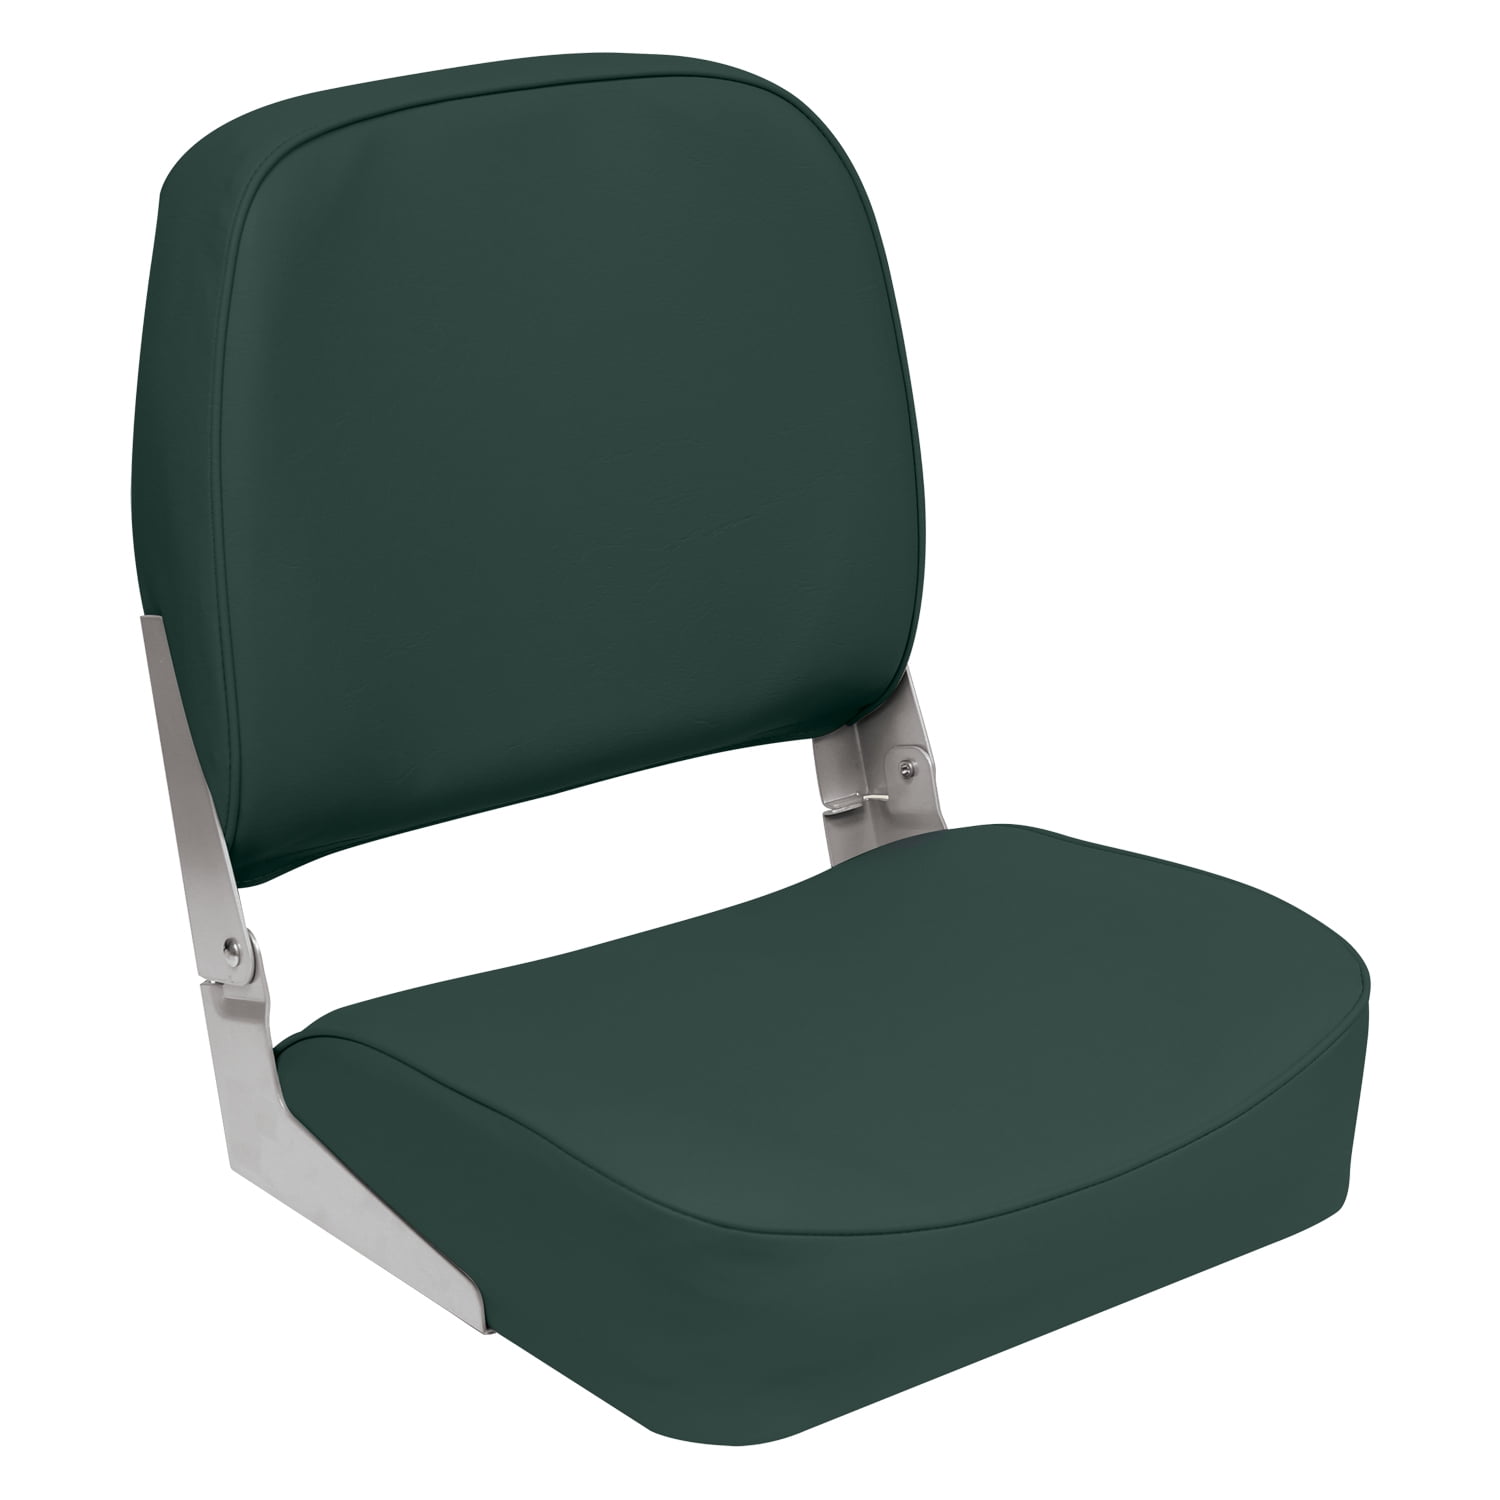 Wise 3313-713 Low Back Boat Seat Green